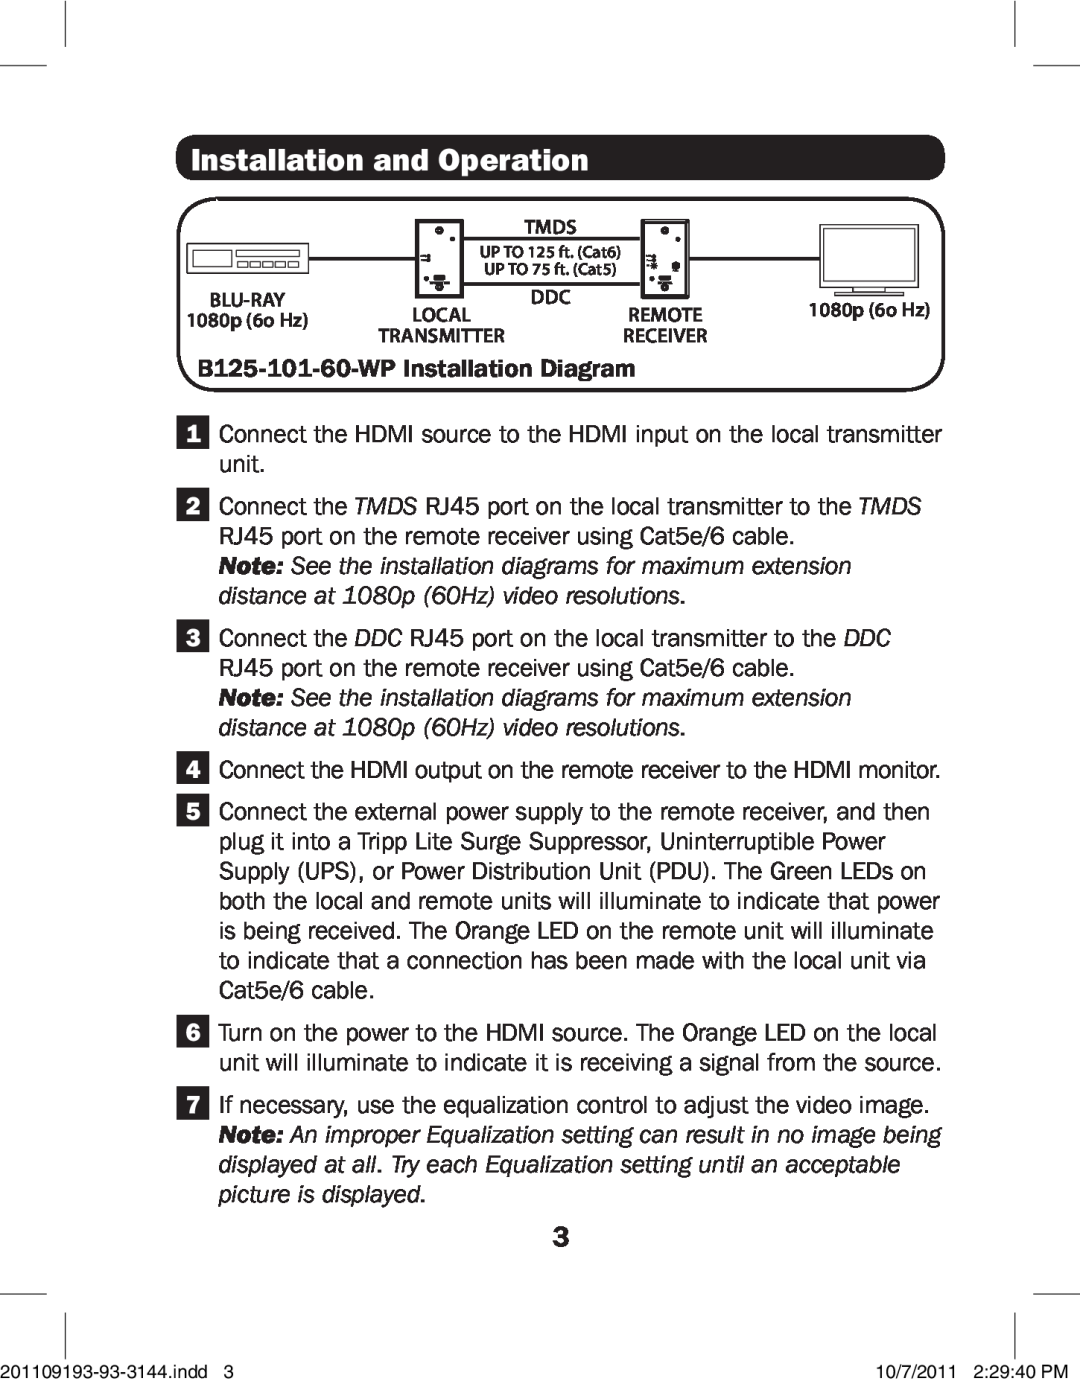 Tripp Lite owner manual Installation and Operation, B125-101-60-WP Installation Diagram 